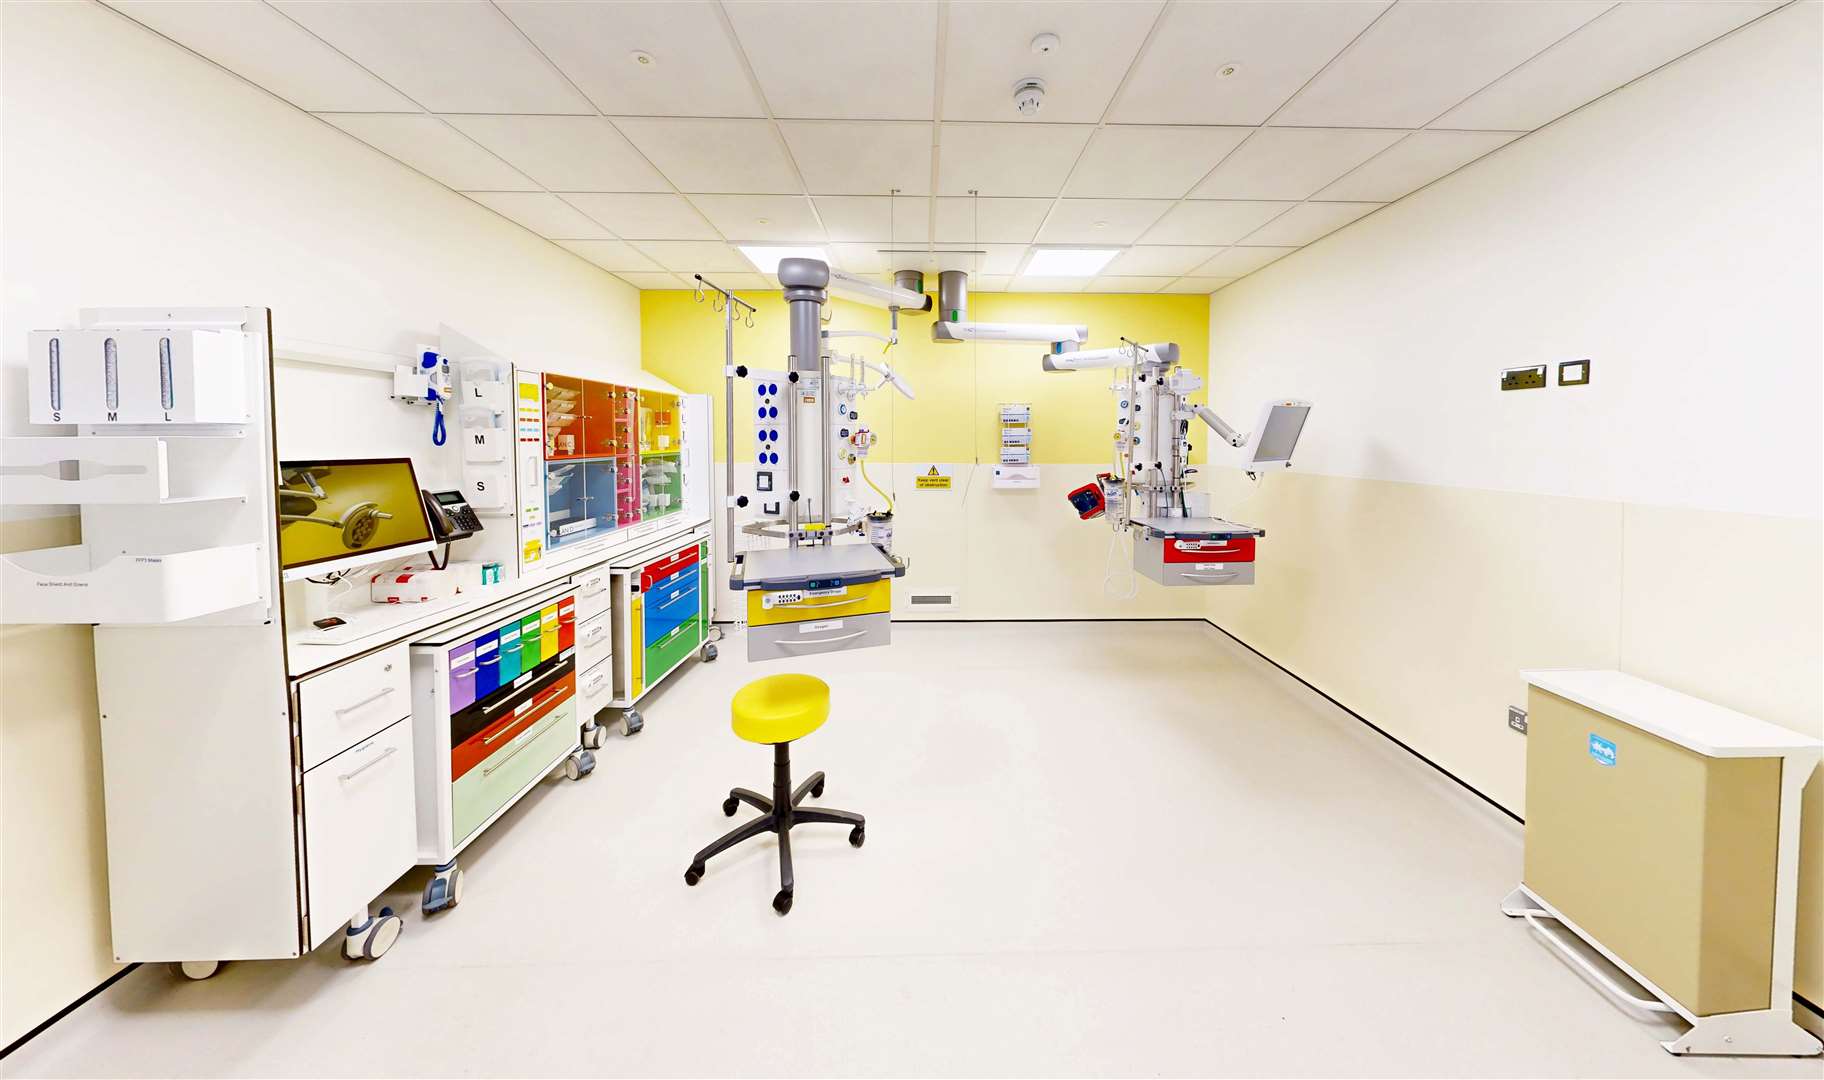 Other additions at the Margate hospital include a rapid assessment and treatment unit, dedicated mental health facilities, a children’s emergency department, a new entrance and waiting area, a treatment area for adults and a relatives’ room. Picture: East Kent Hospitals Trust